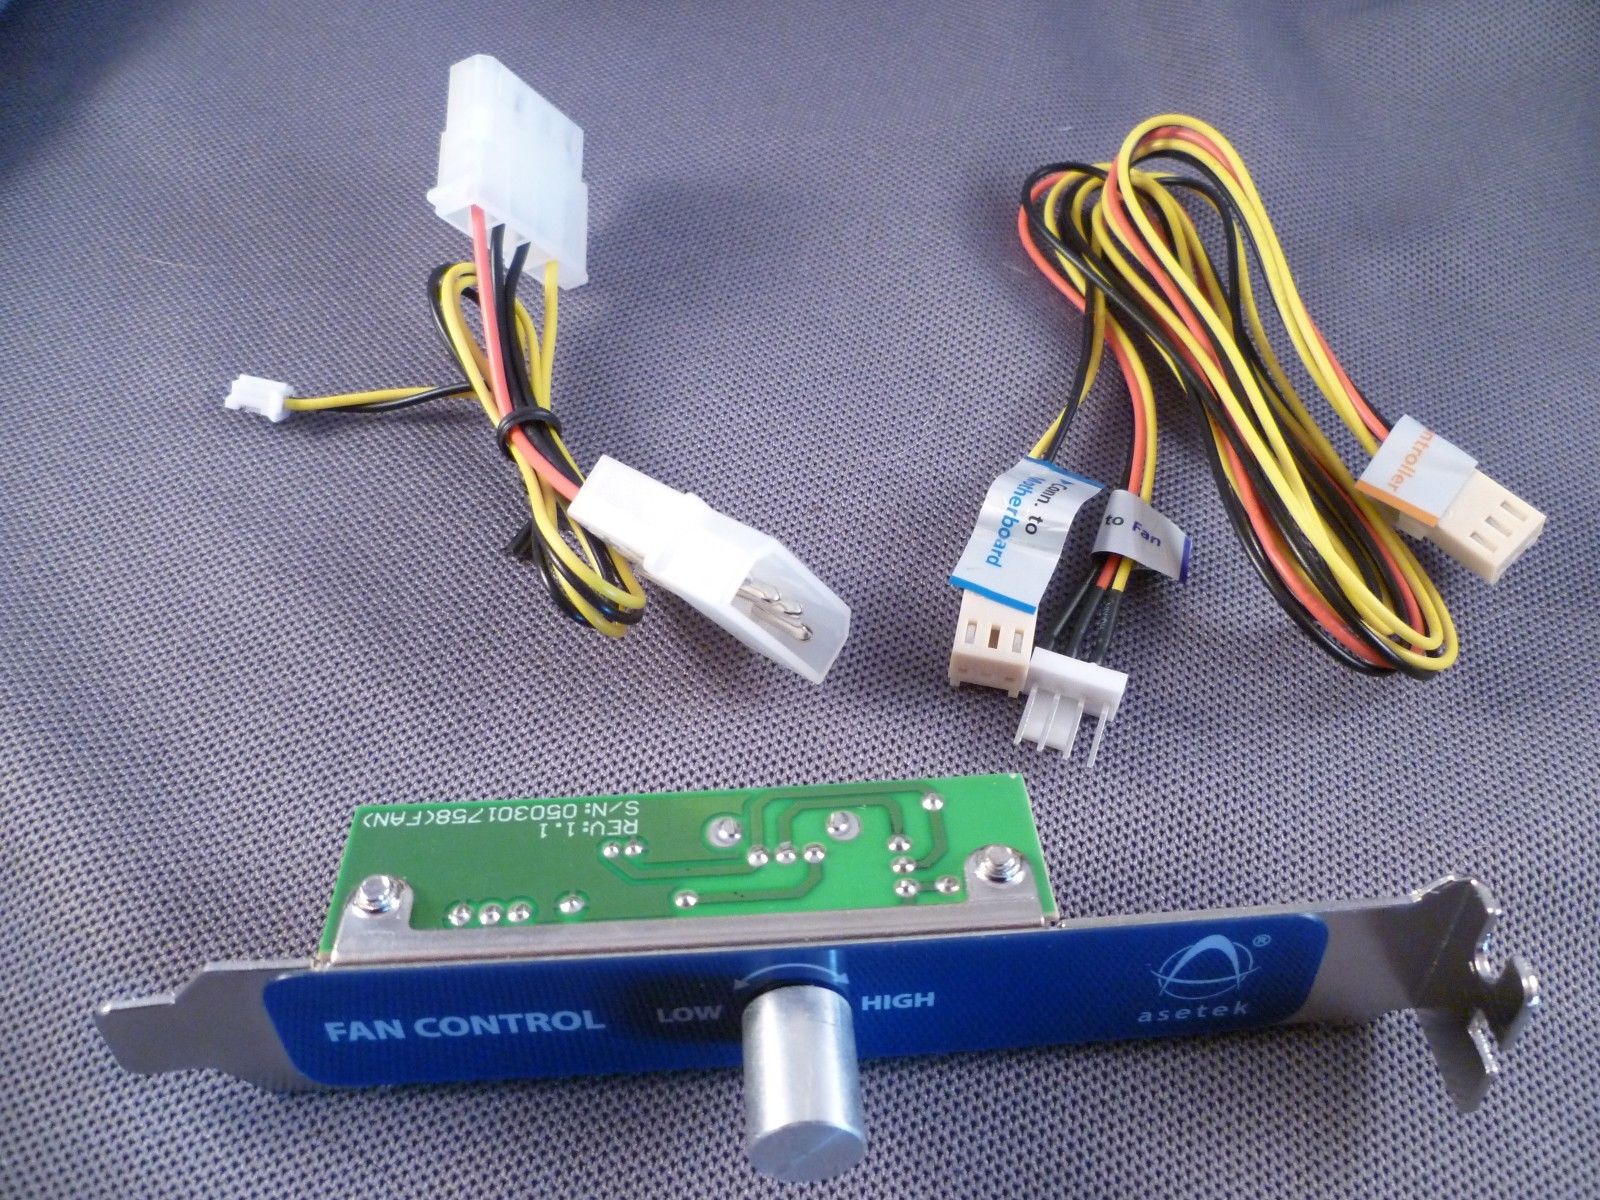 Asetek Speed Controller and Connection Kit to Motherboard for PC Fans OM0941B